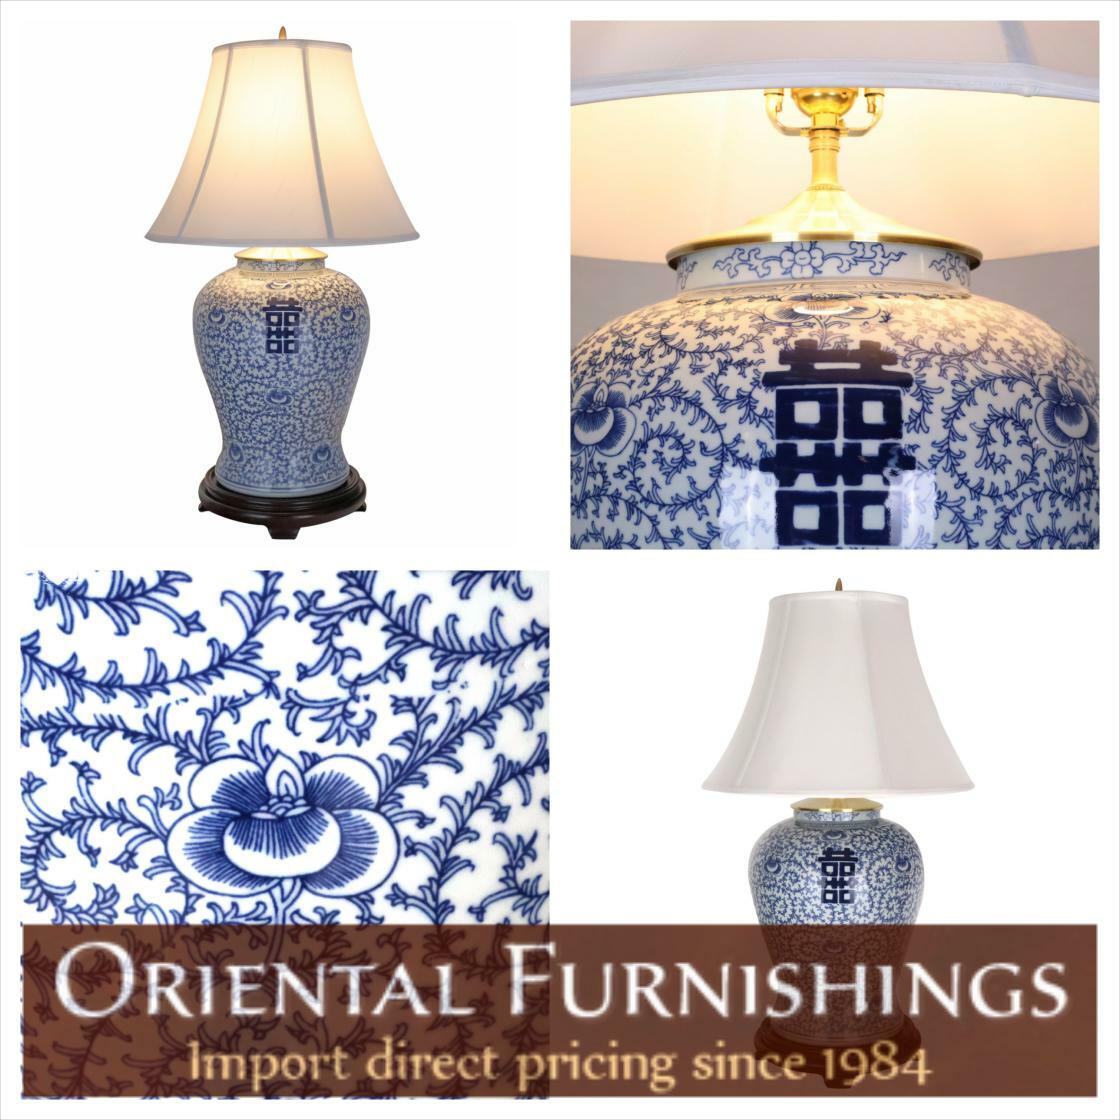 #chinoiserie 30'H. Hand Painted Blue and White Chinese Porcelain Lamp with 3 way switch, Fabric Shade and Wooden Stand Seen here: bit.ly/3RlenzZ